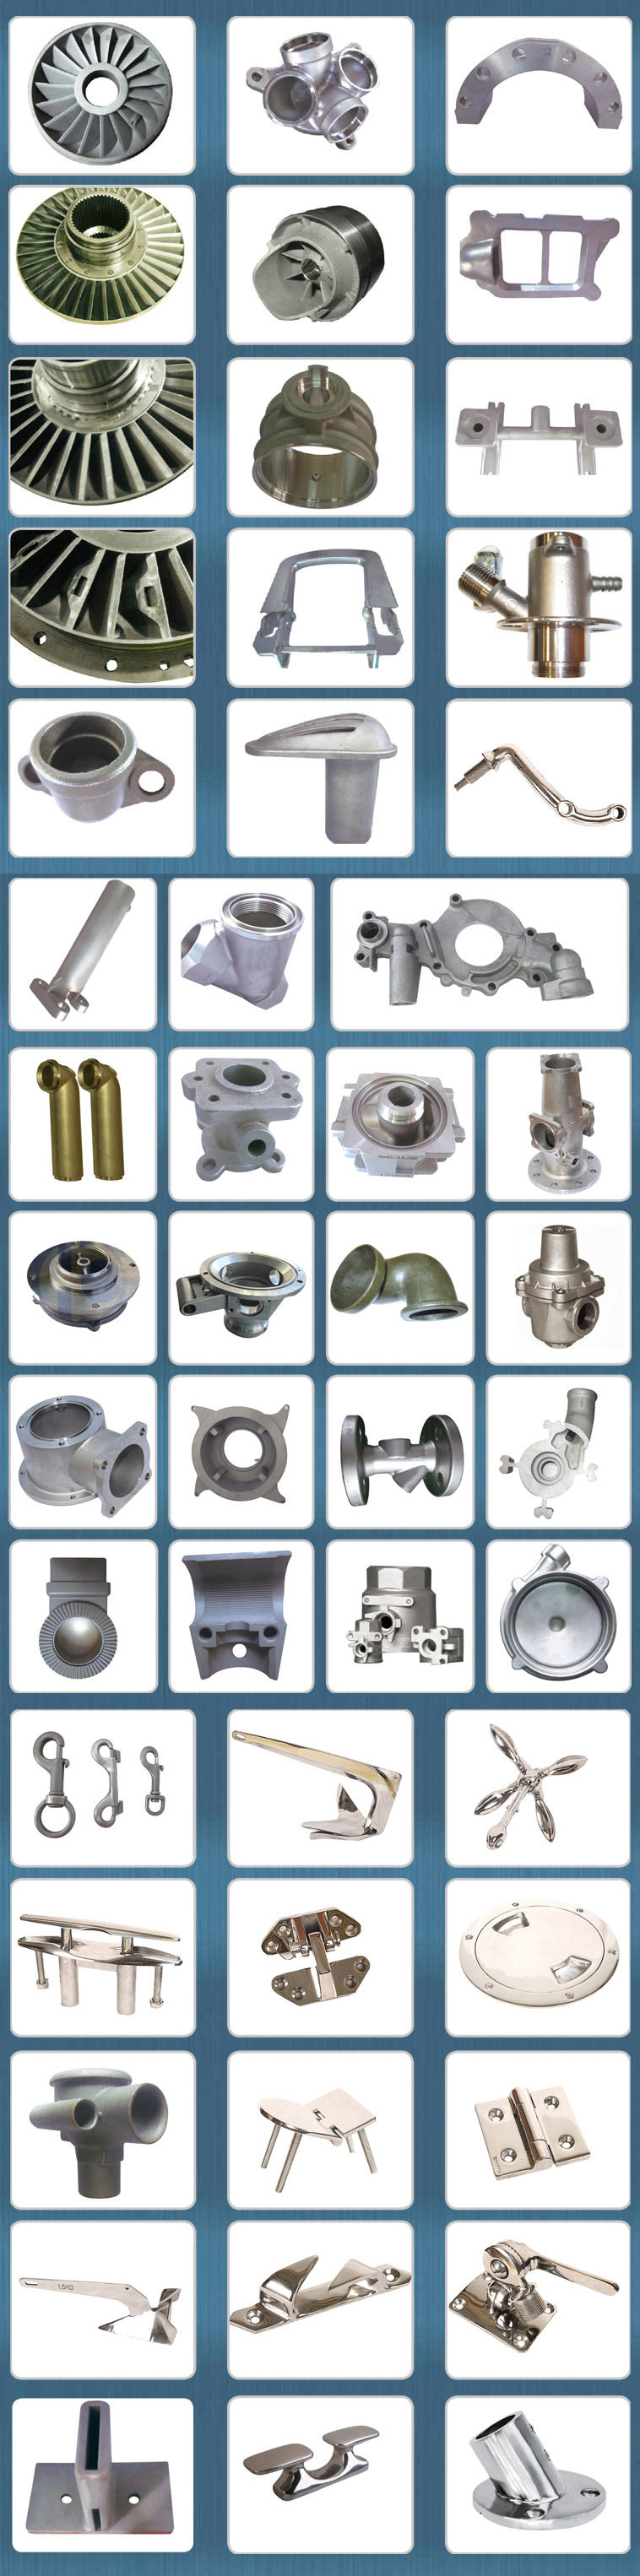 Steel Farm Machinery Parts Made by Lost Wax Casting Method